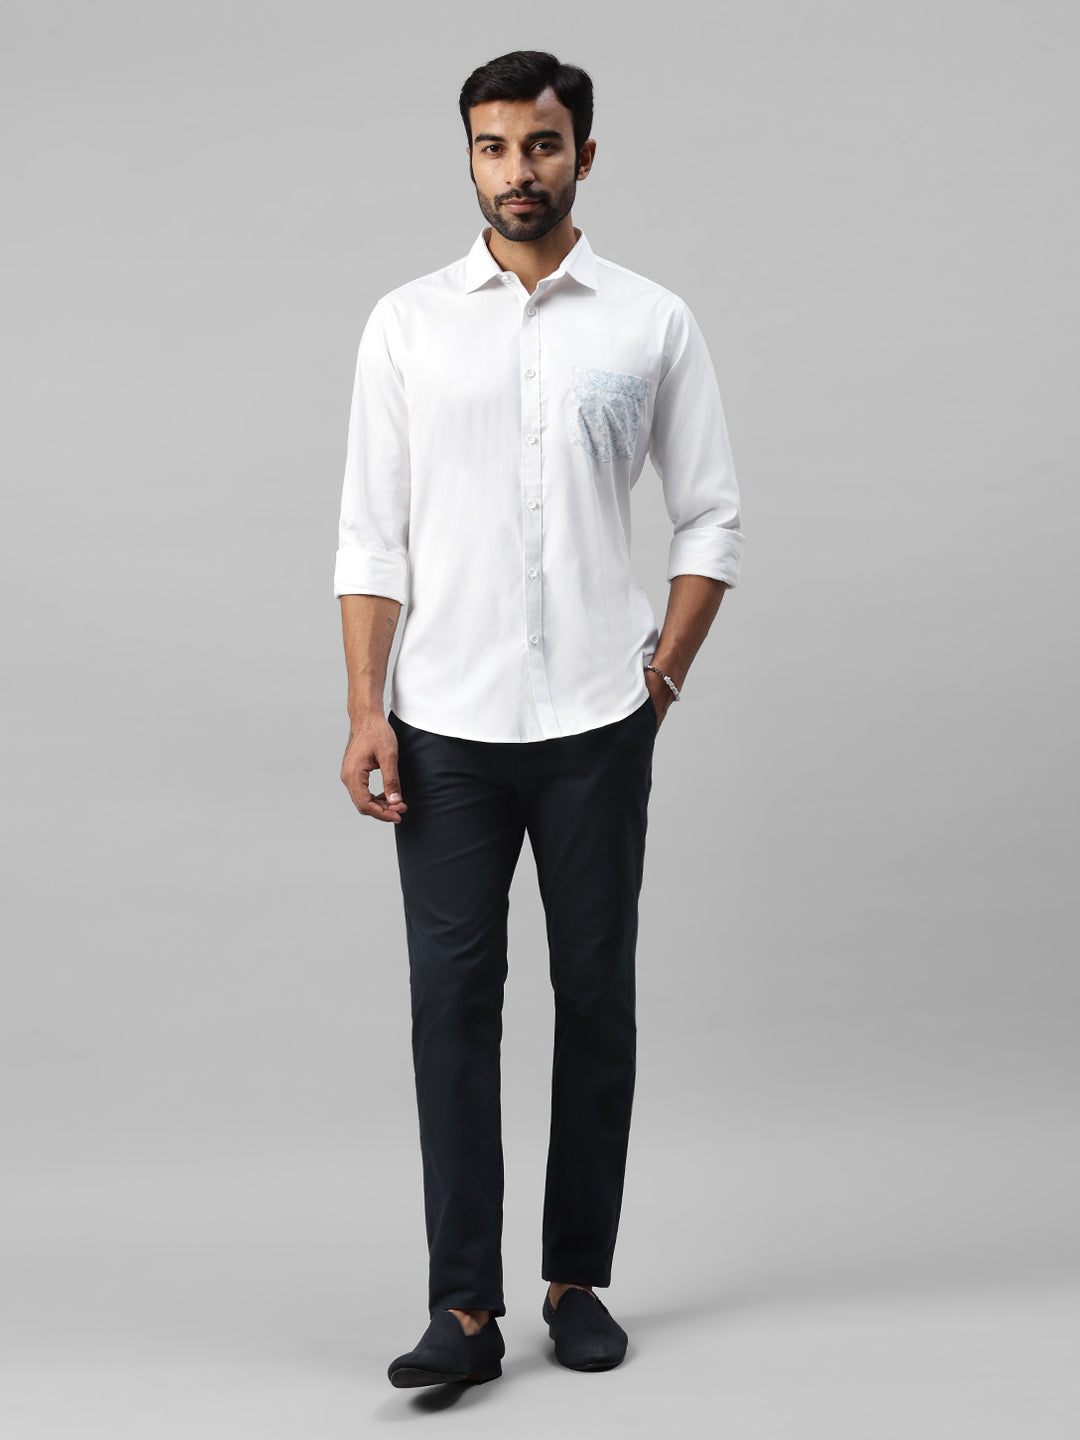 Don Vino Men's Slim Fit Shirt with Contrast Pockets